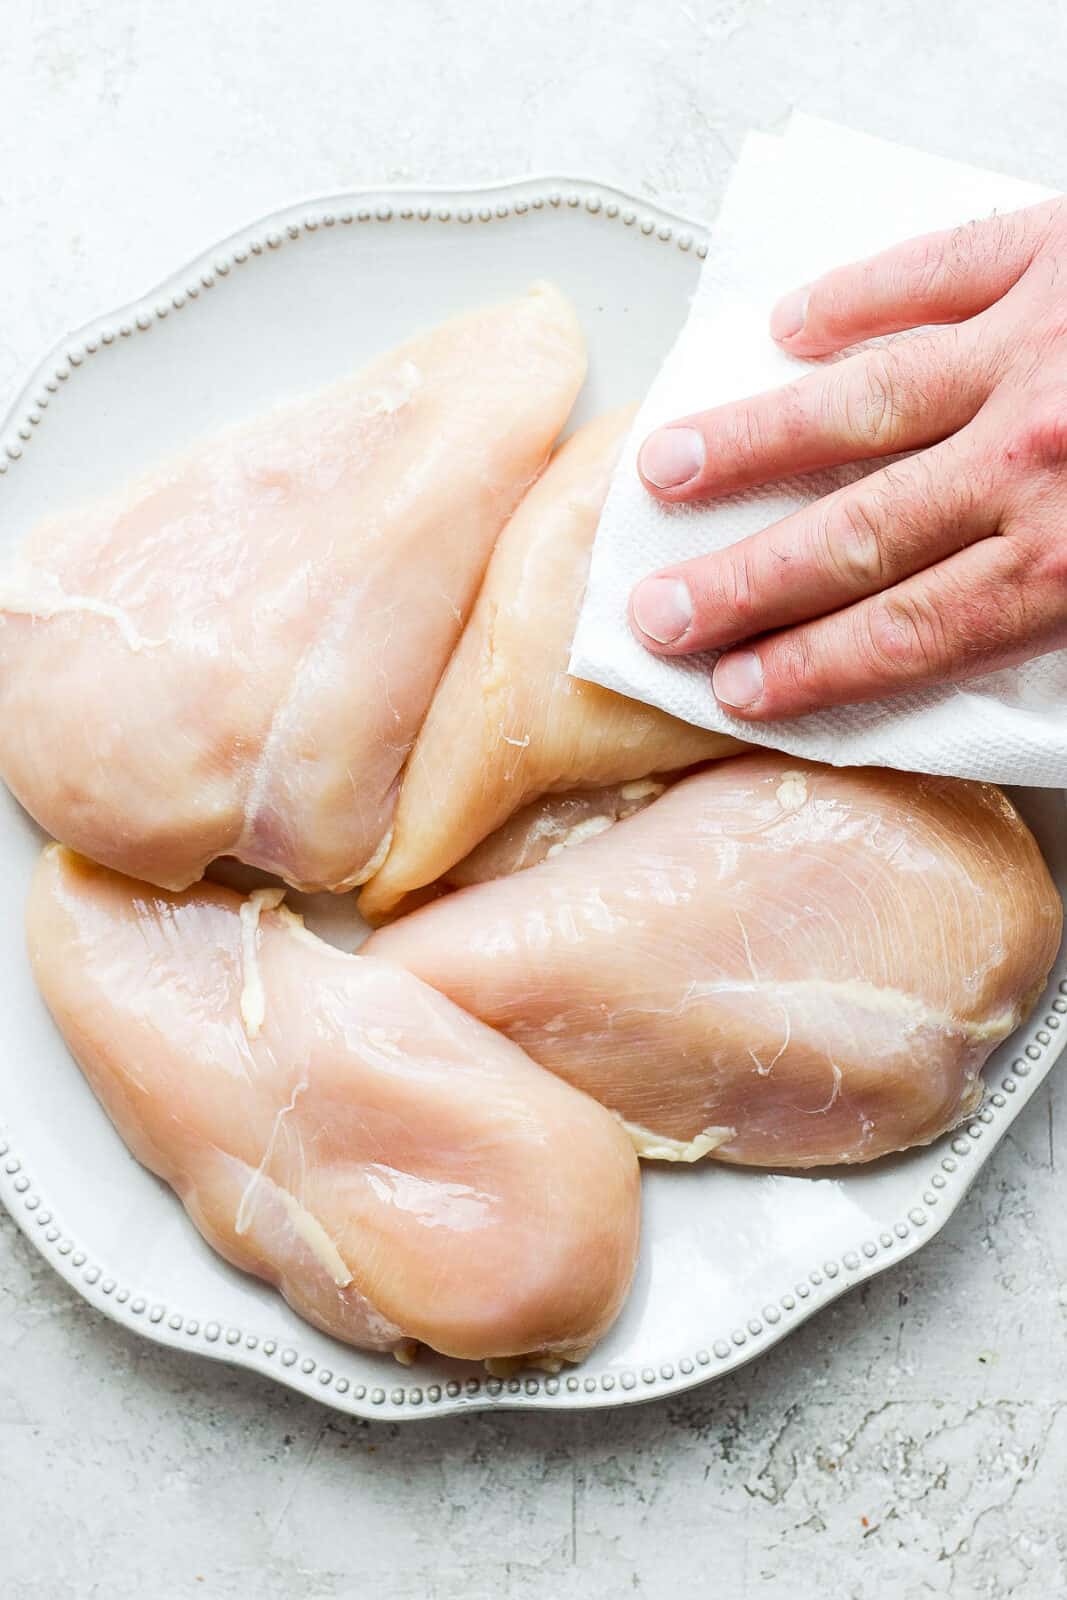 Someone patting dry a plate of raw chicken breasts.